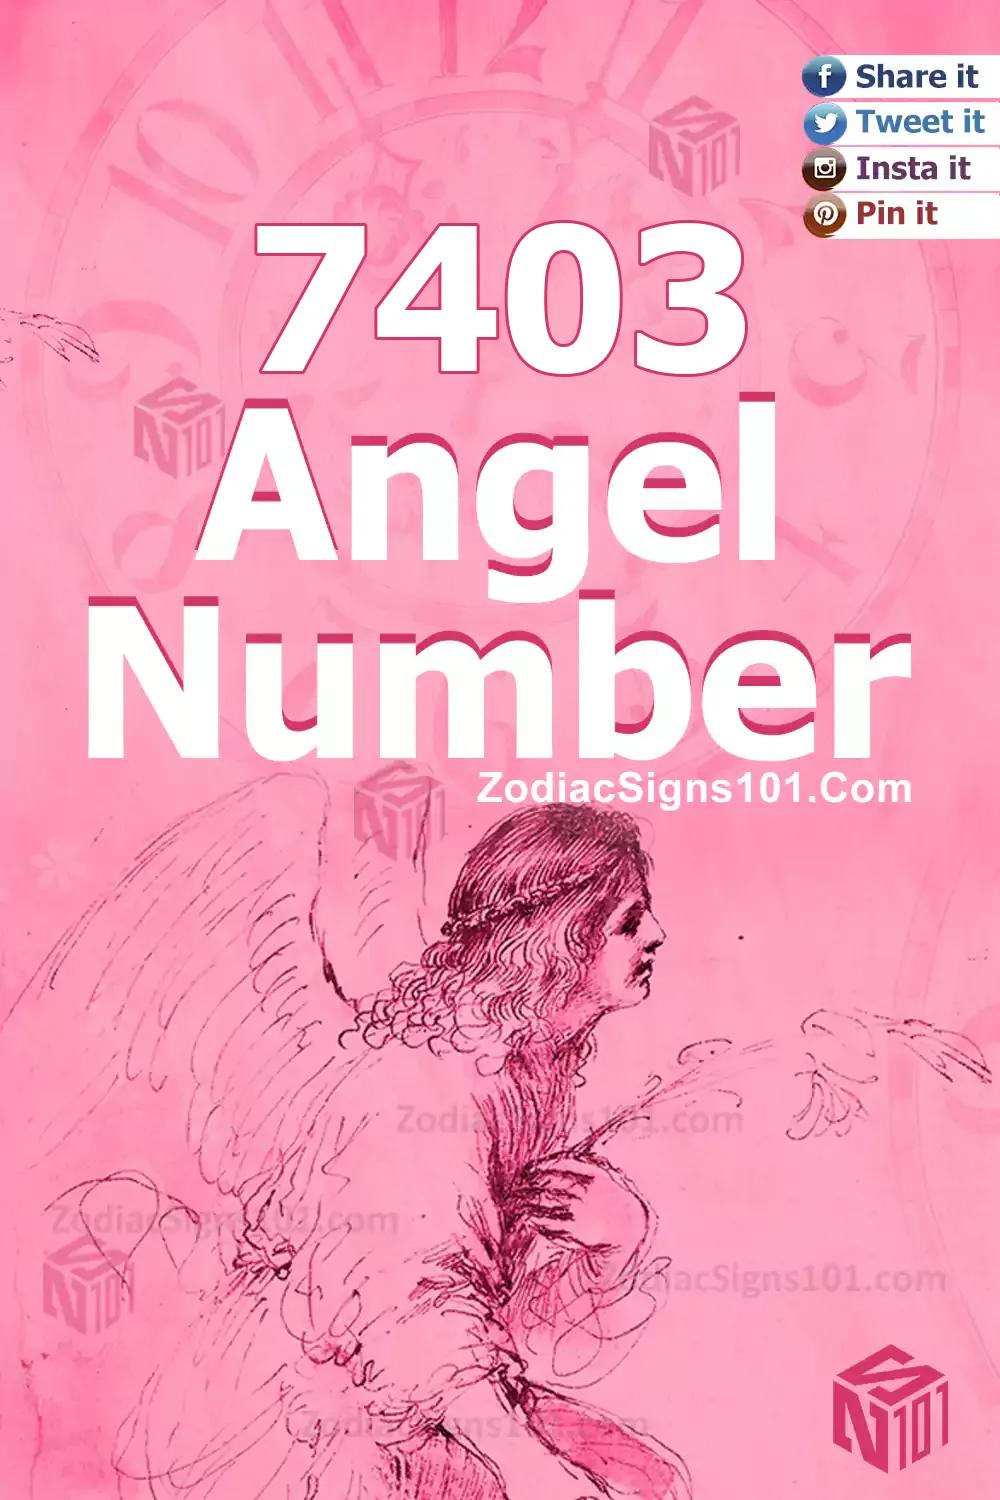 7403 Angel Number Meaning